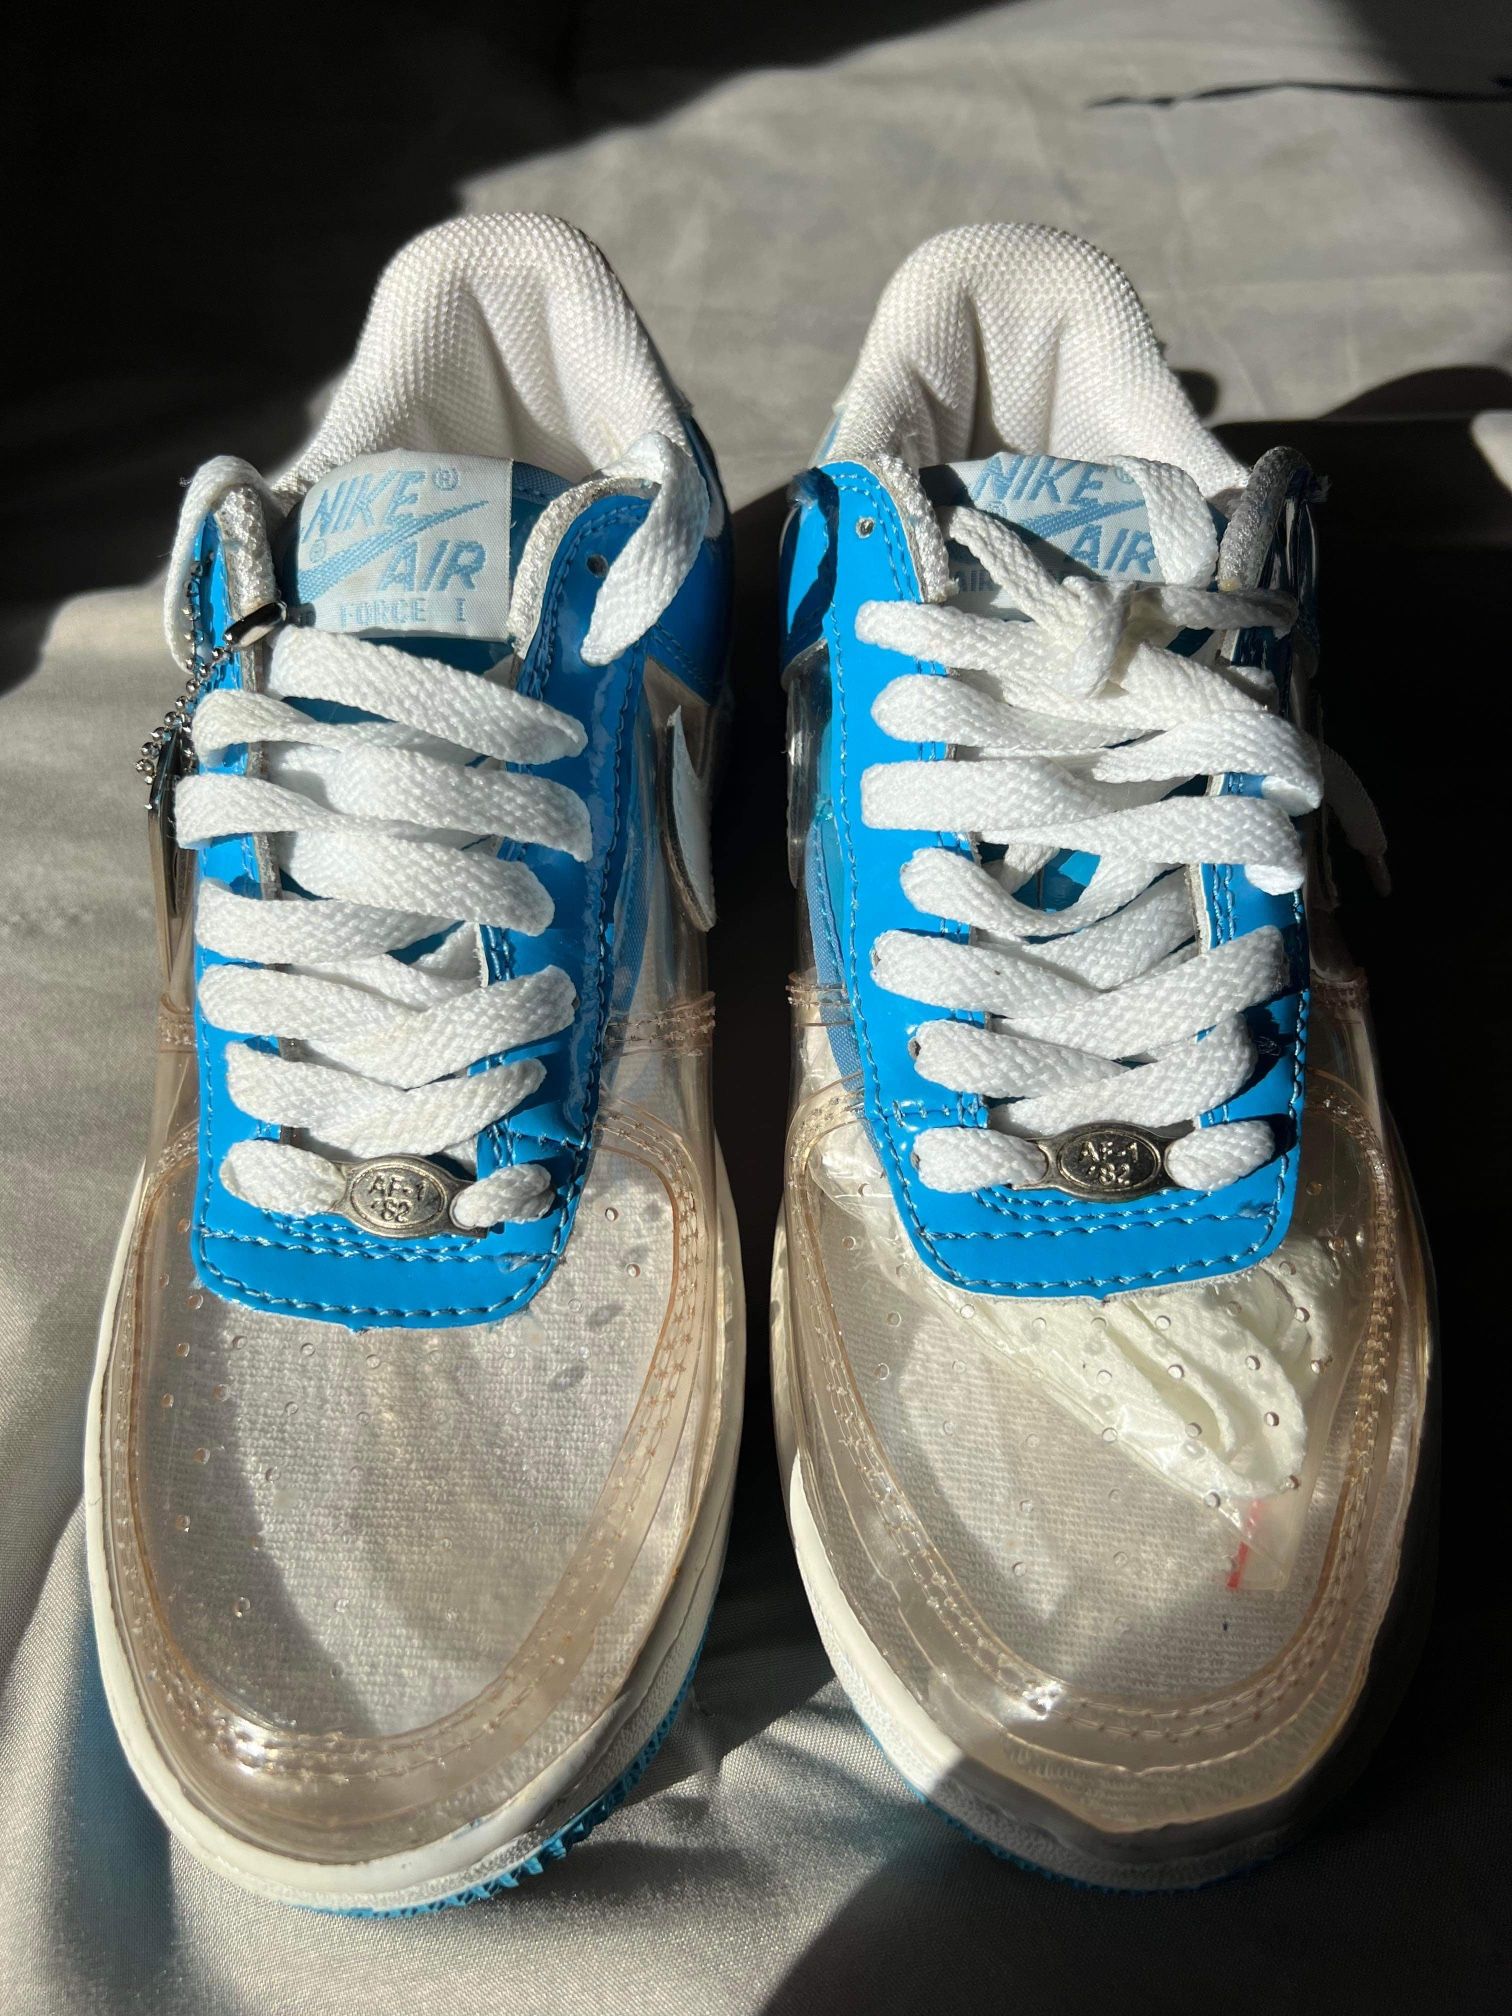 LV Air Force 1s for Sale in Newport News, VA - OfferUp